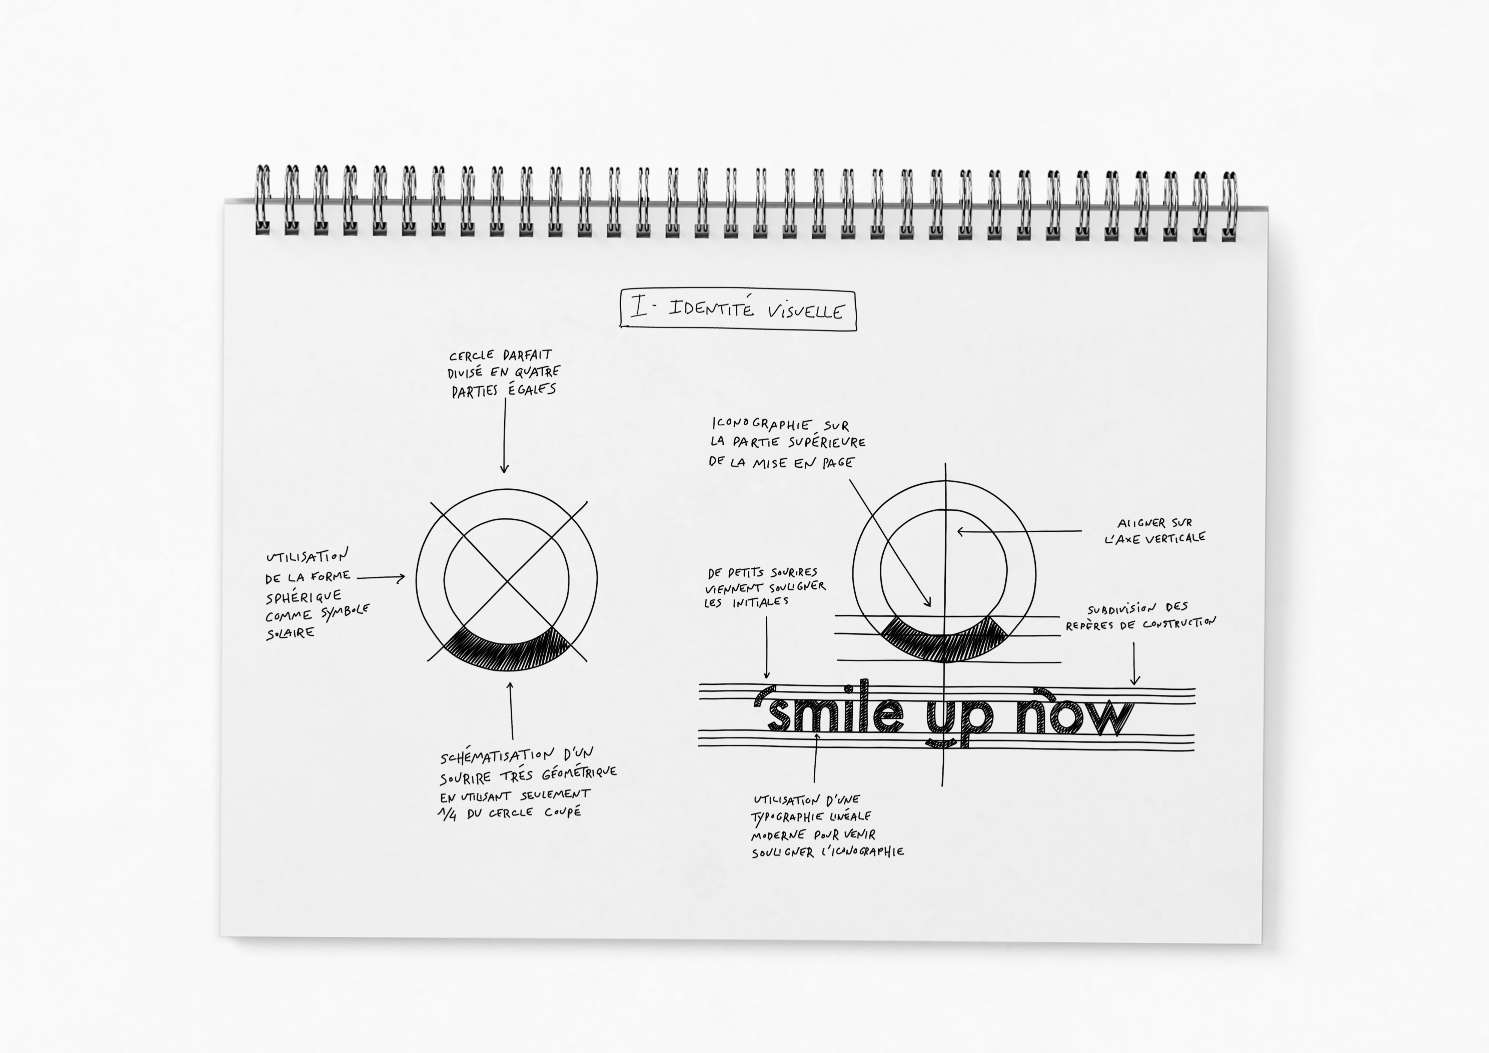 Smile Up Now - agence les Douze 1